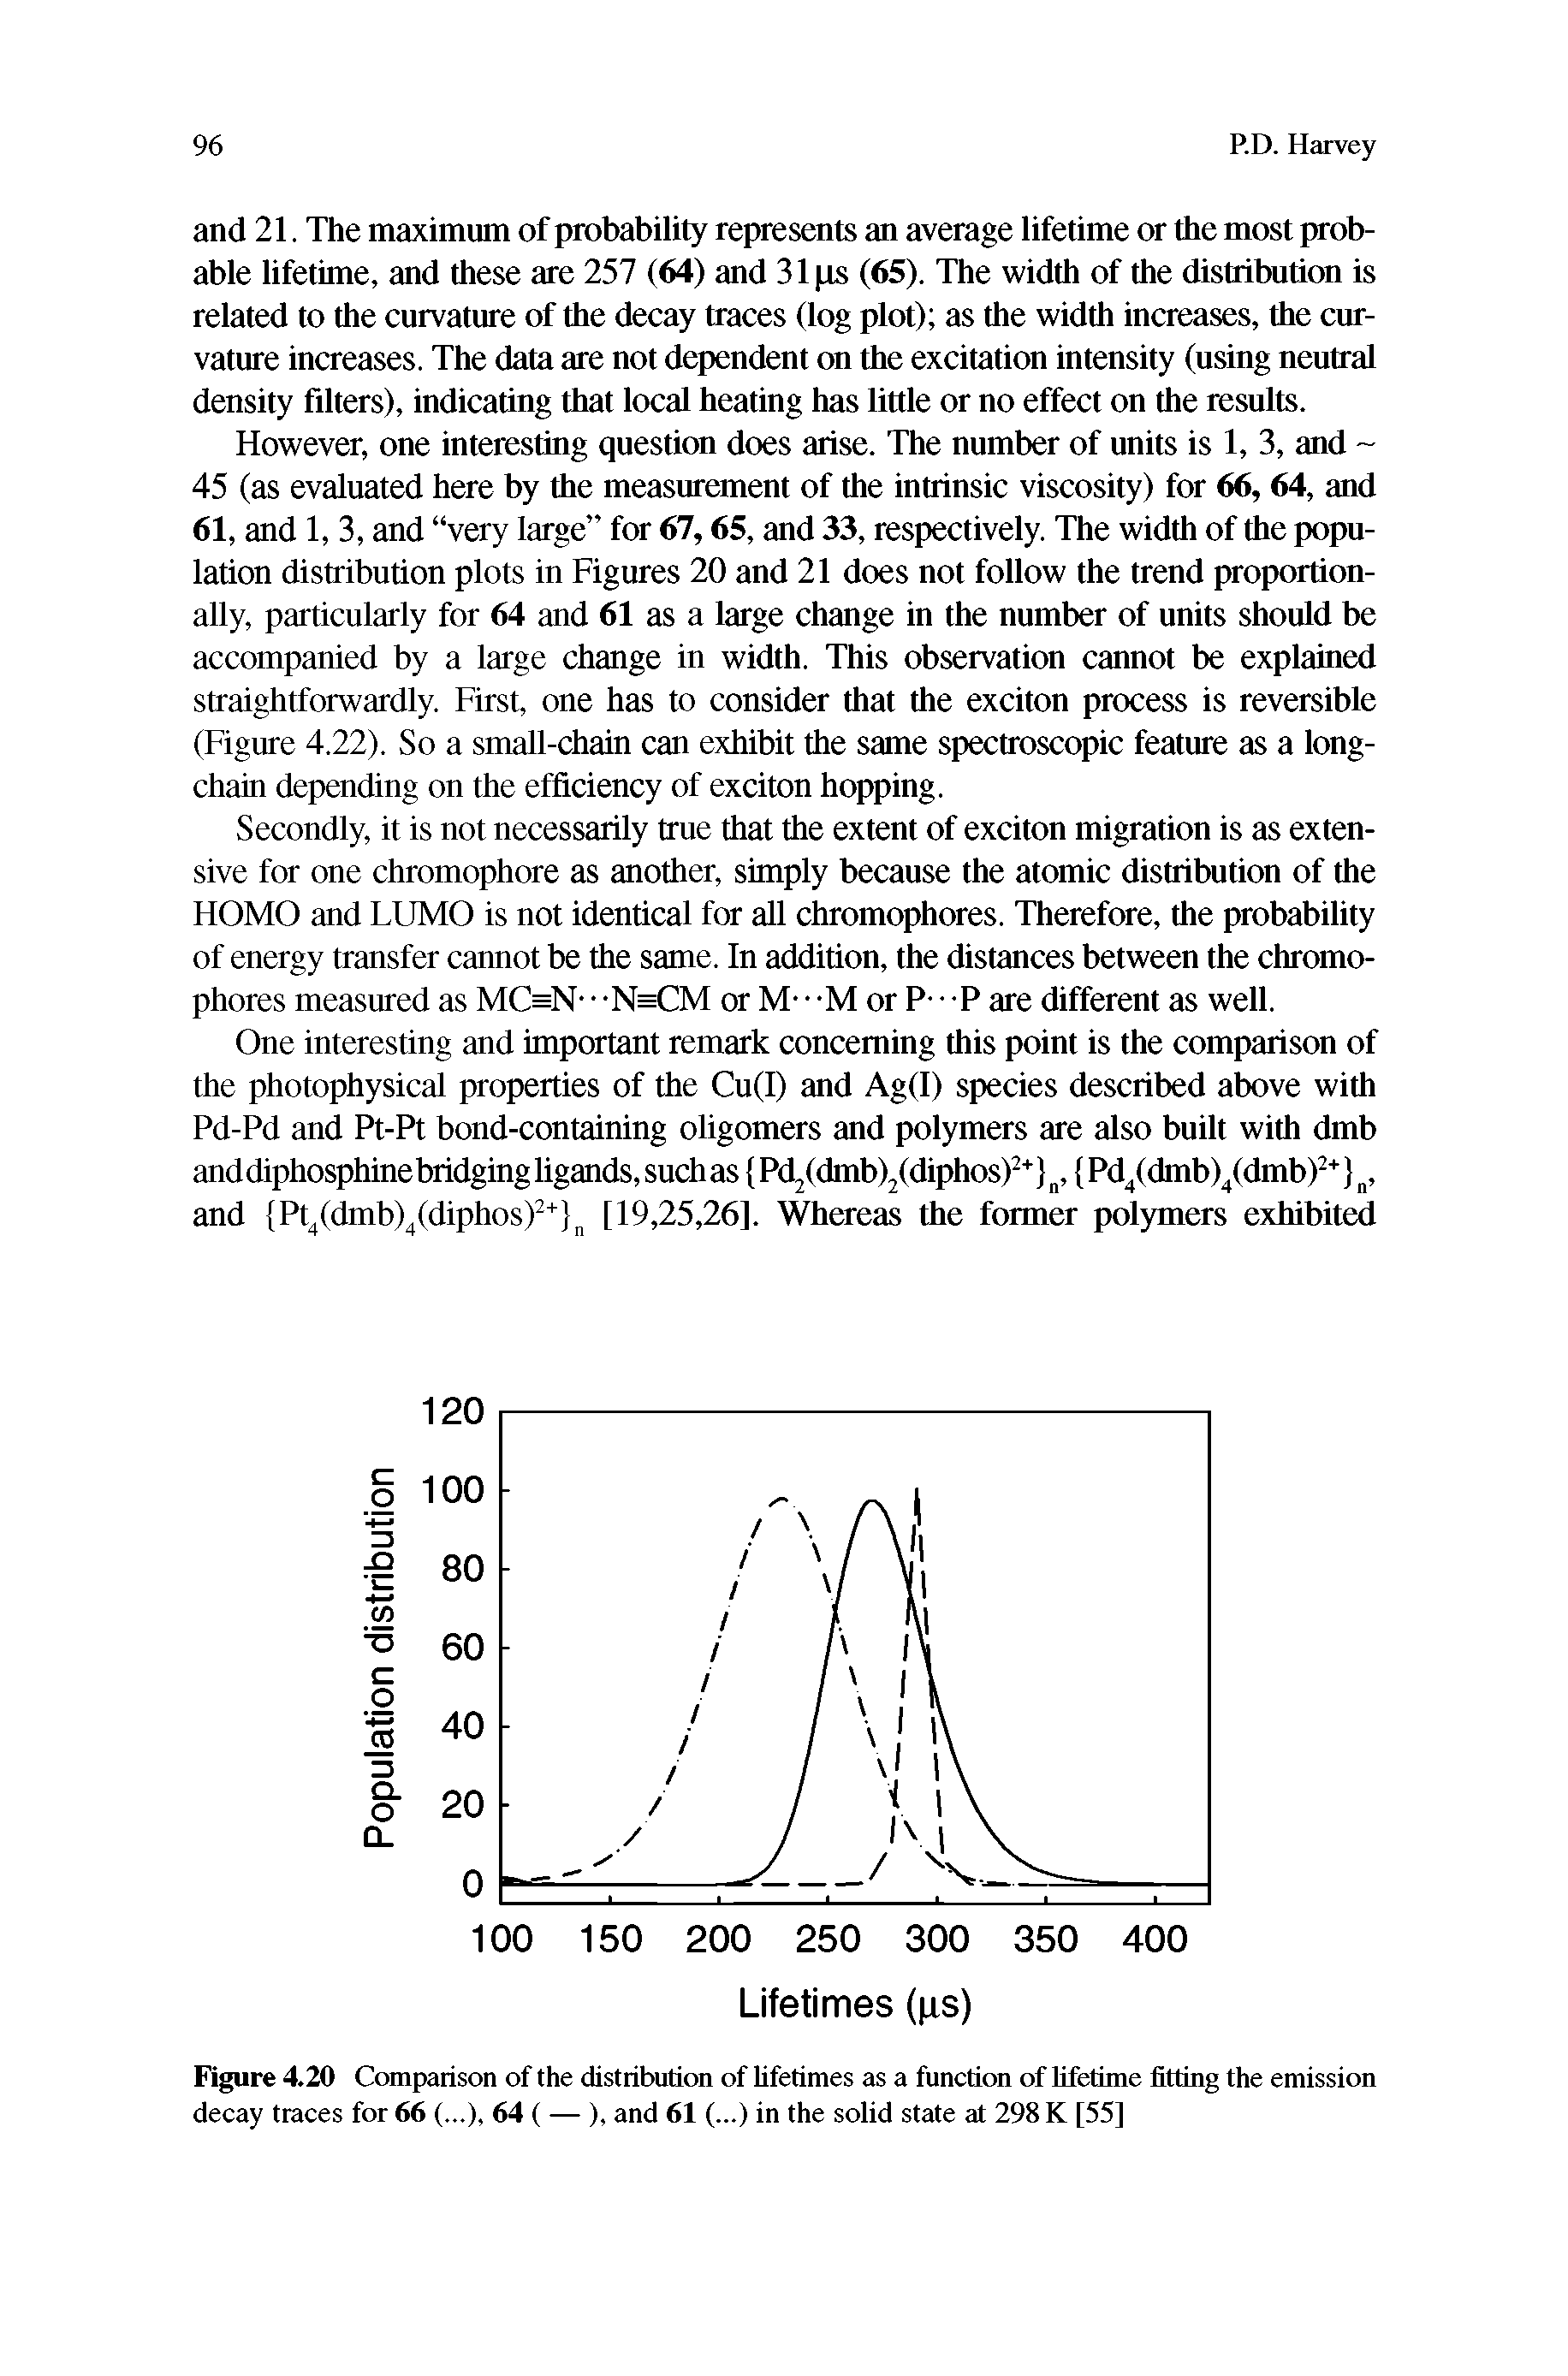 Figure 4.20 CompEirison of the distribution of lifetimes as a function of lifetime fitting the emission decay traces for 66 (...), 64 (—), and 61 (...) in the solid state at 298 K [55]...